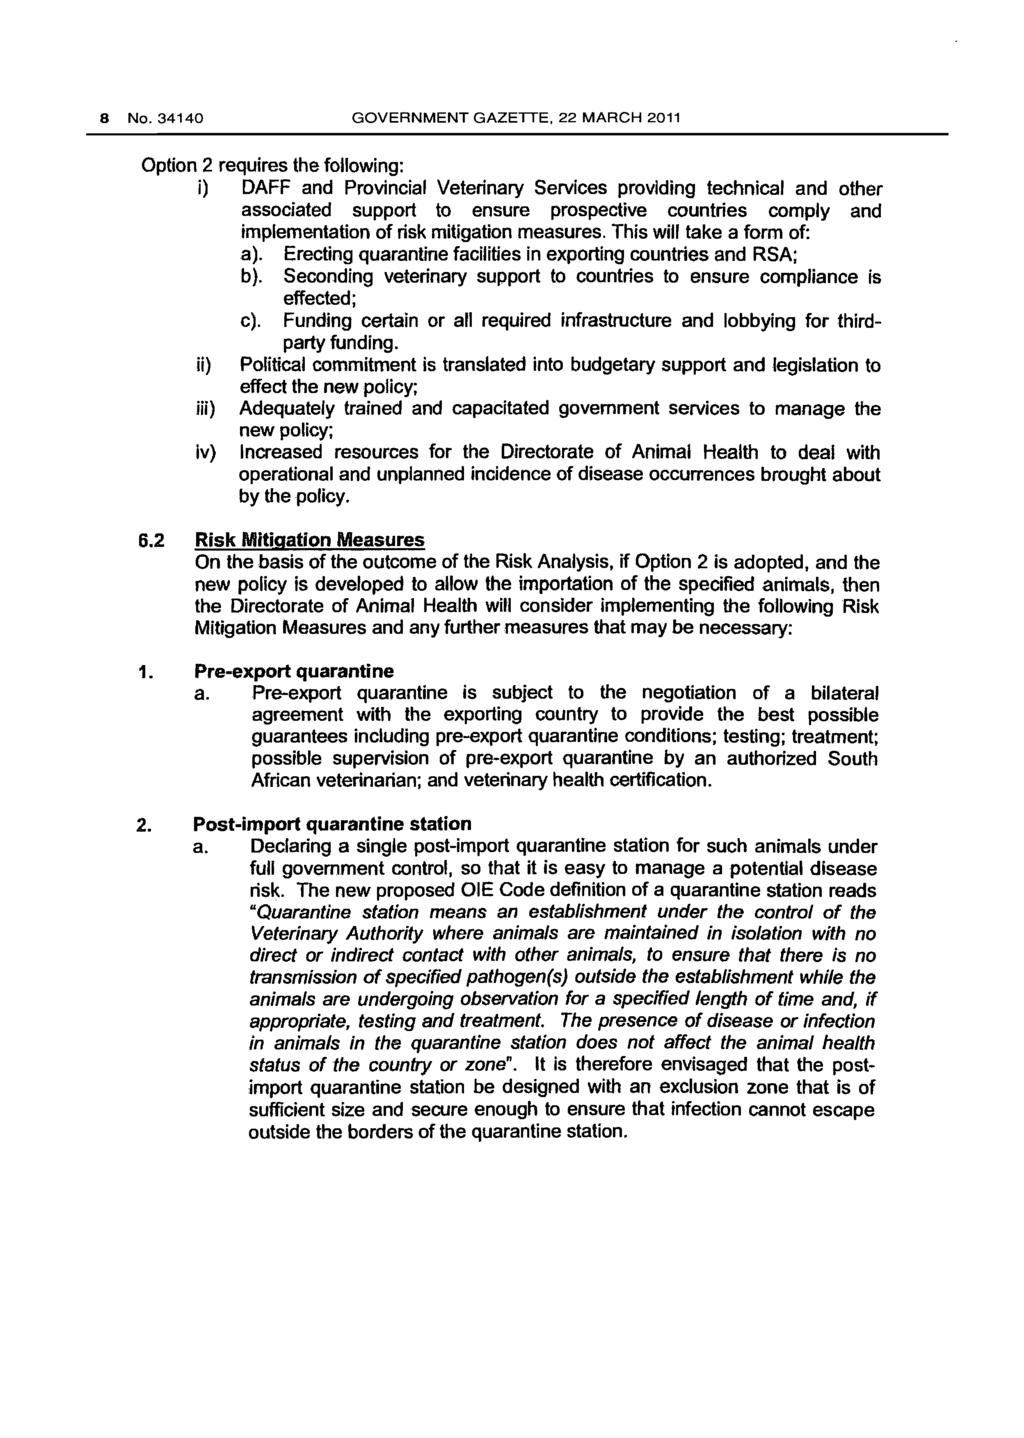 8 No.34140 GOVERNMENT GAZETTE, 22 MARCH 2011 Option 2 requires the following: i) DAFF and Provincial Veterinary Services providing technical and other associated support to ensure prospective